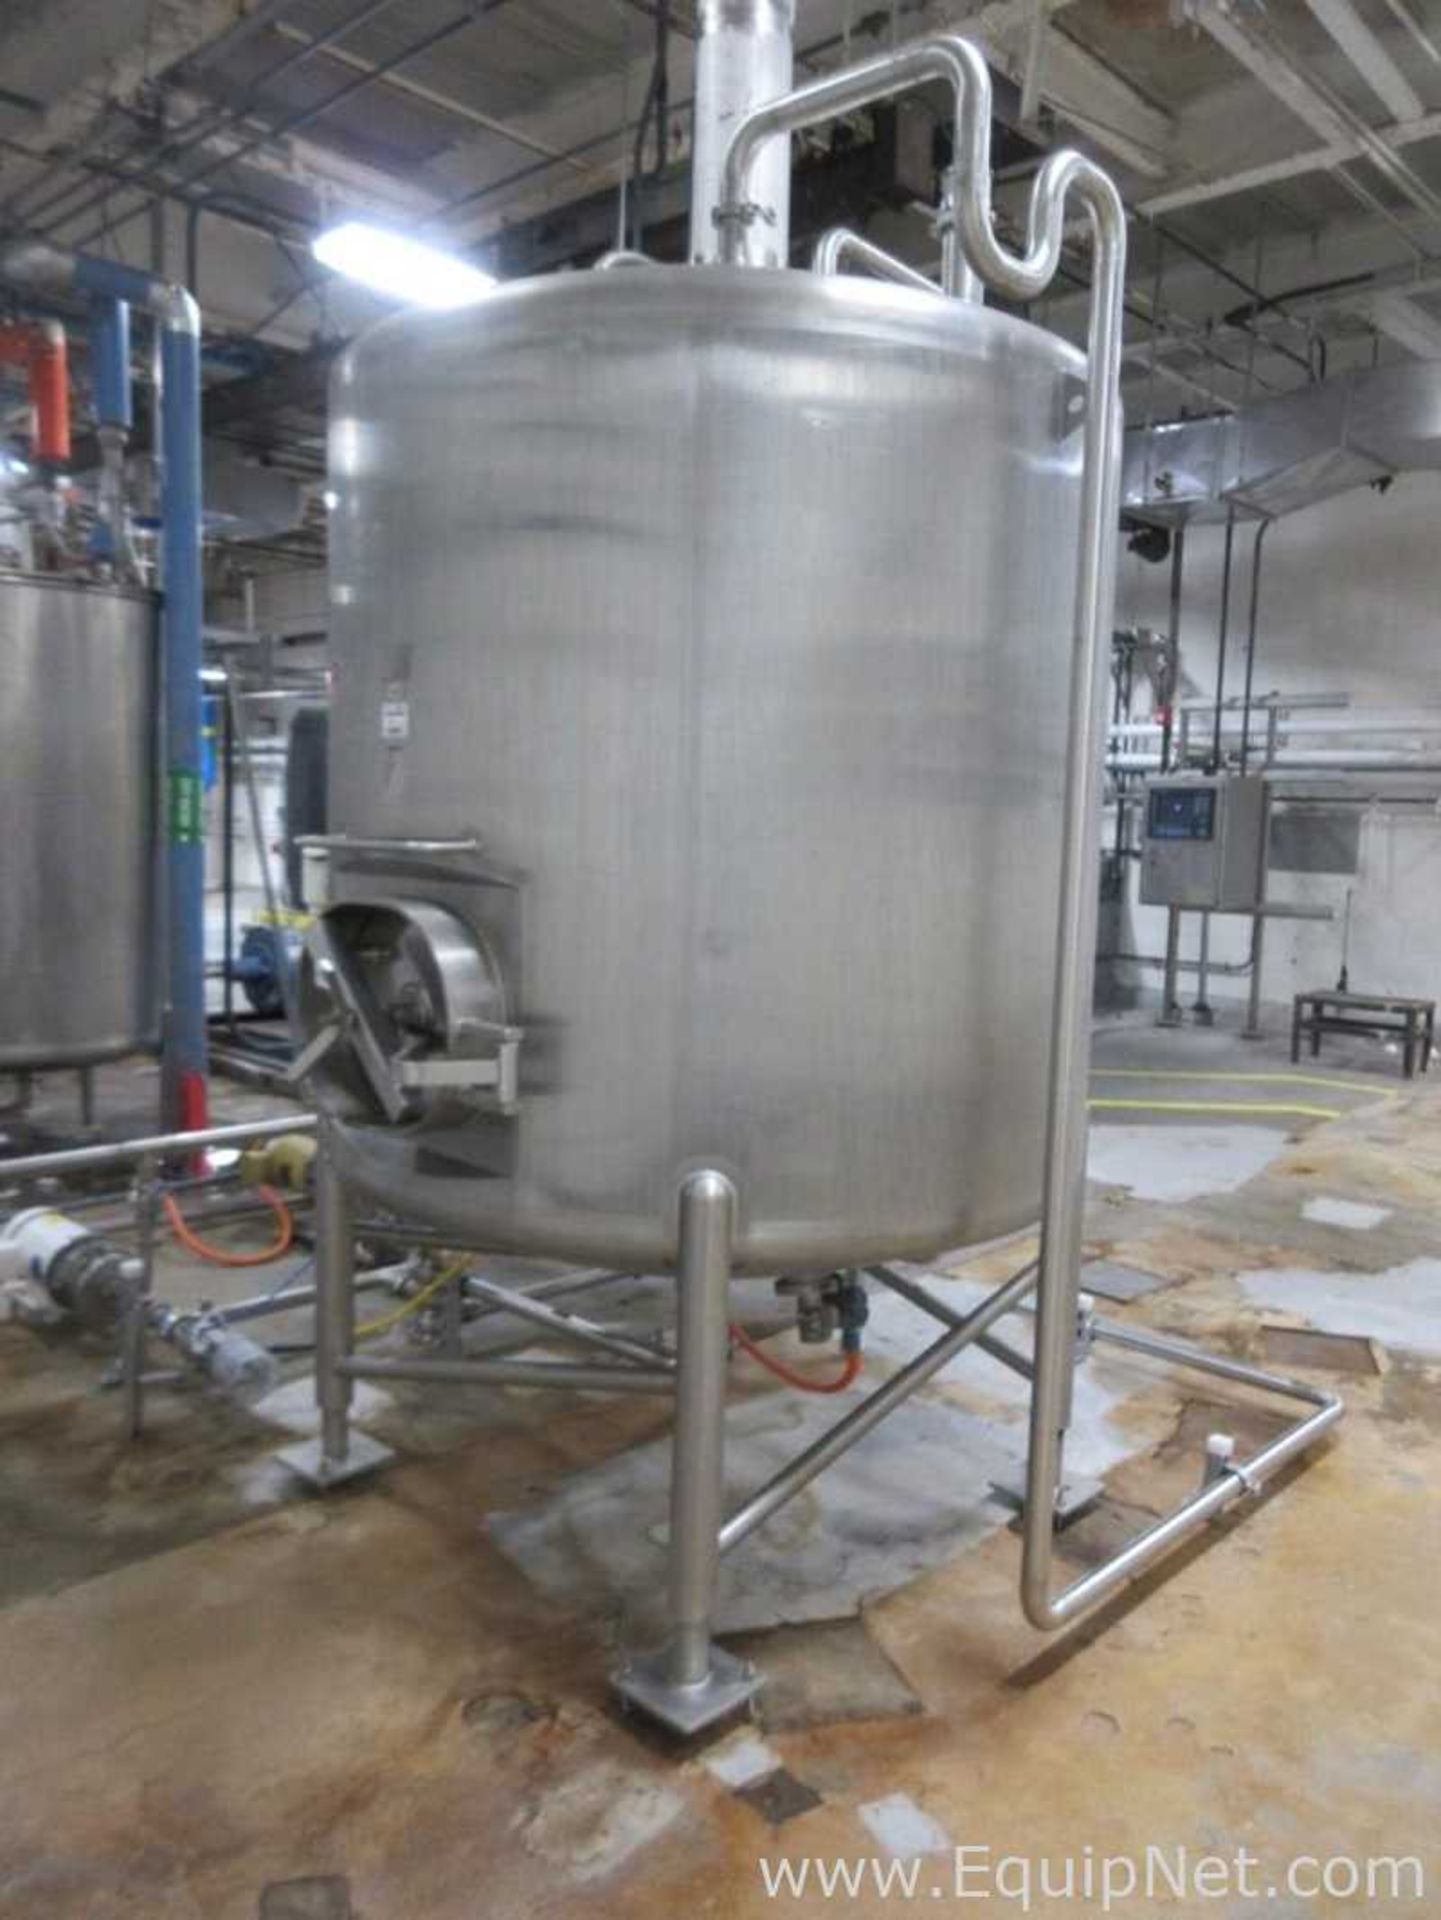 750 Gallon Cherry Burrell Stainless Steel Tank - Image 2 of 7